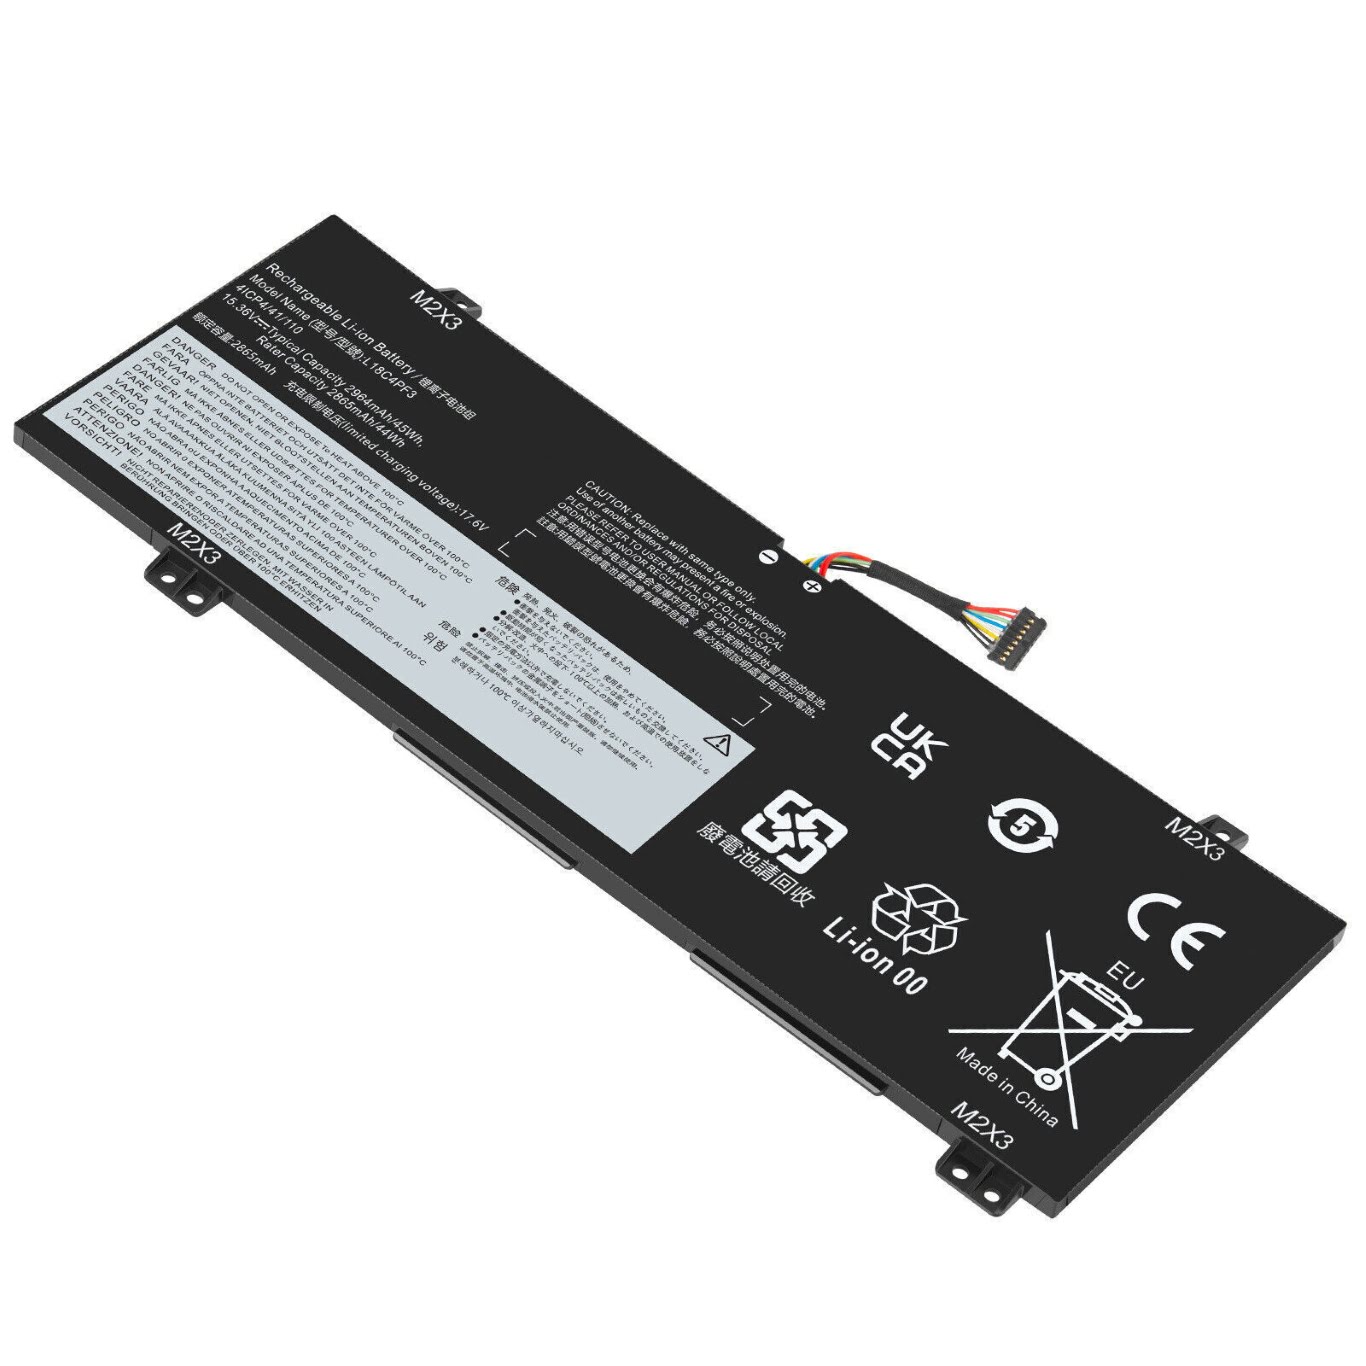 5B10T09077, 5B10T09079 replacement Laptop Battery for Lenovo Flex 14 2-in-1 Convertible 14 Inch, Flex-14API 81SS0005US Series, 4 cells, 15.36v, 45wh/2964mah